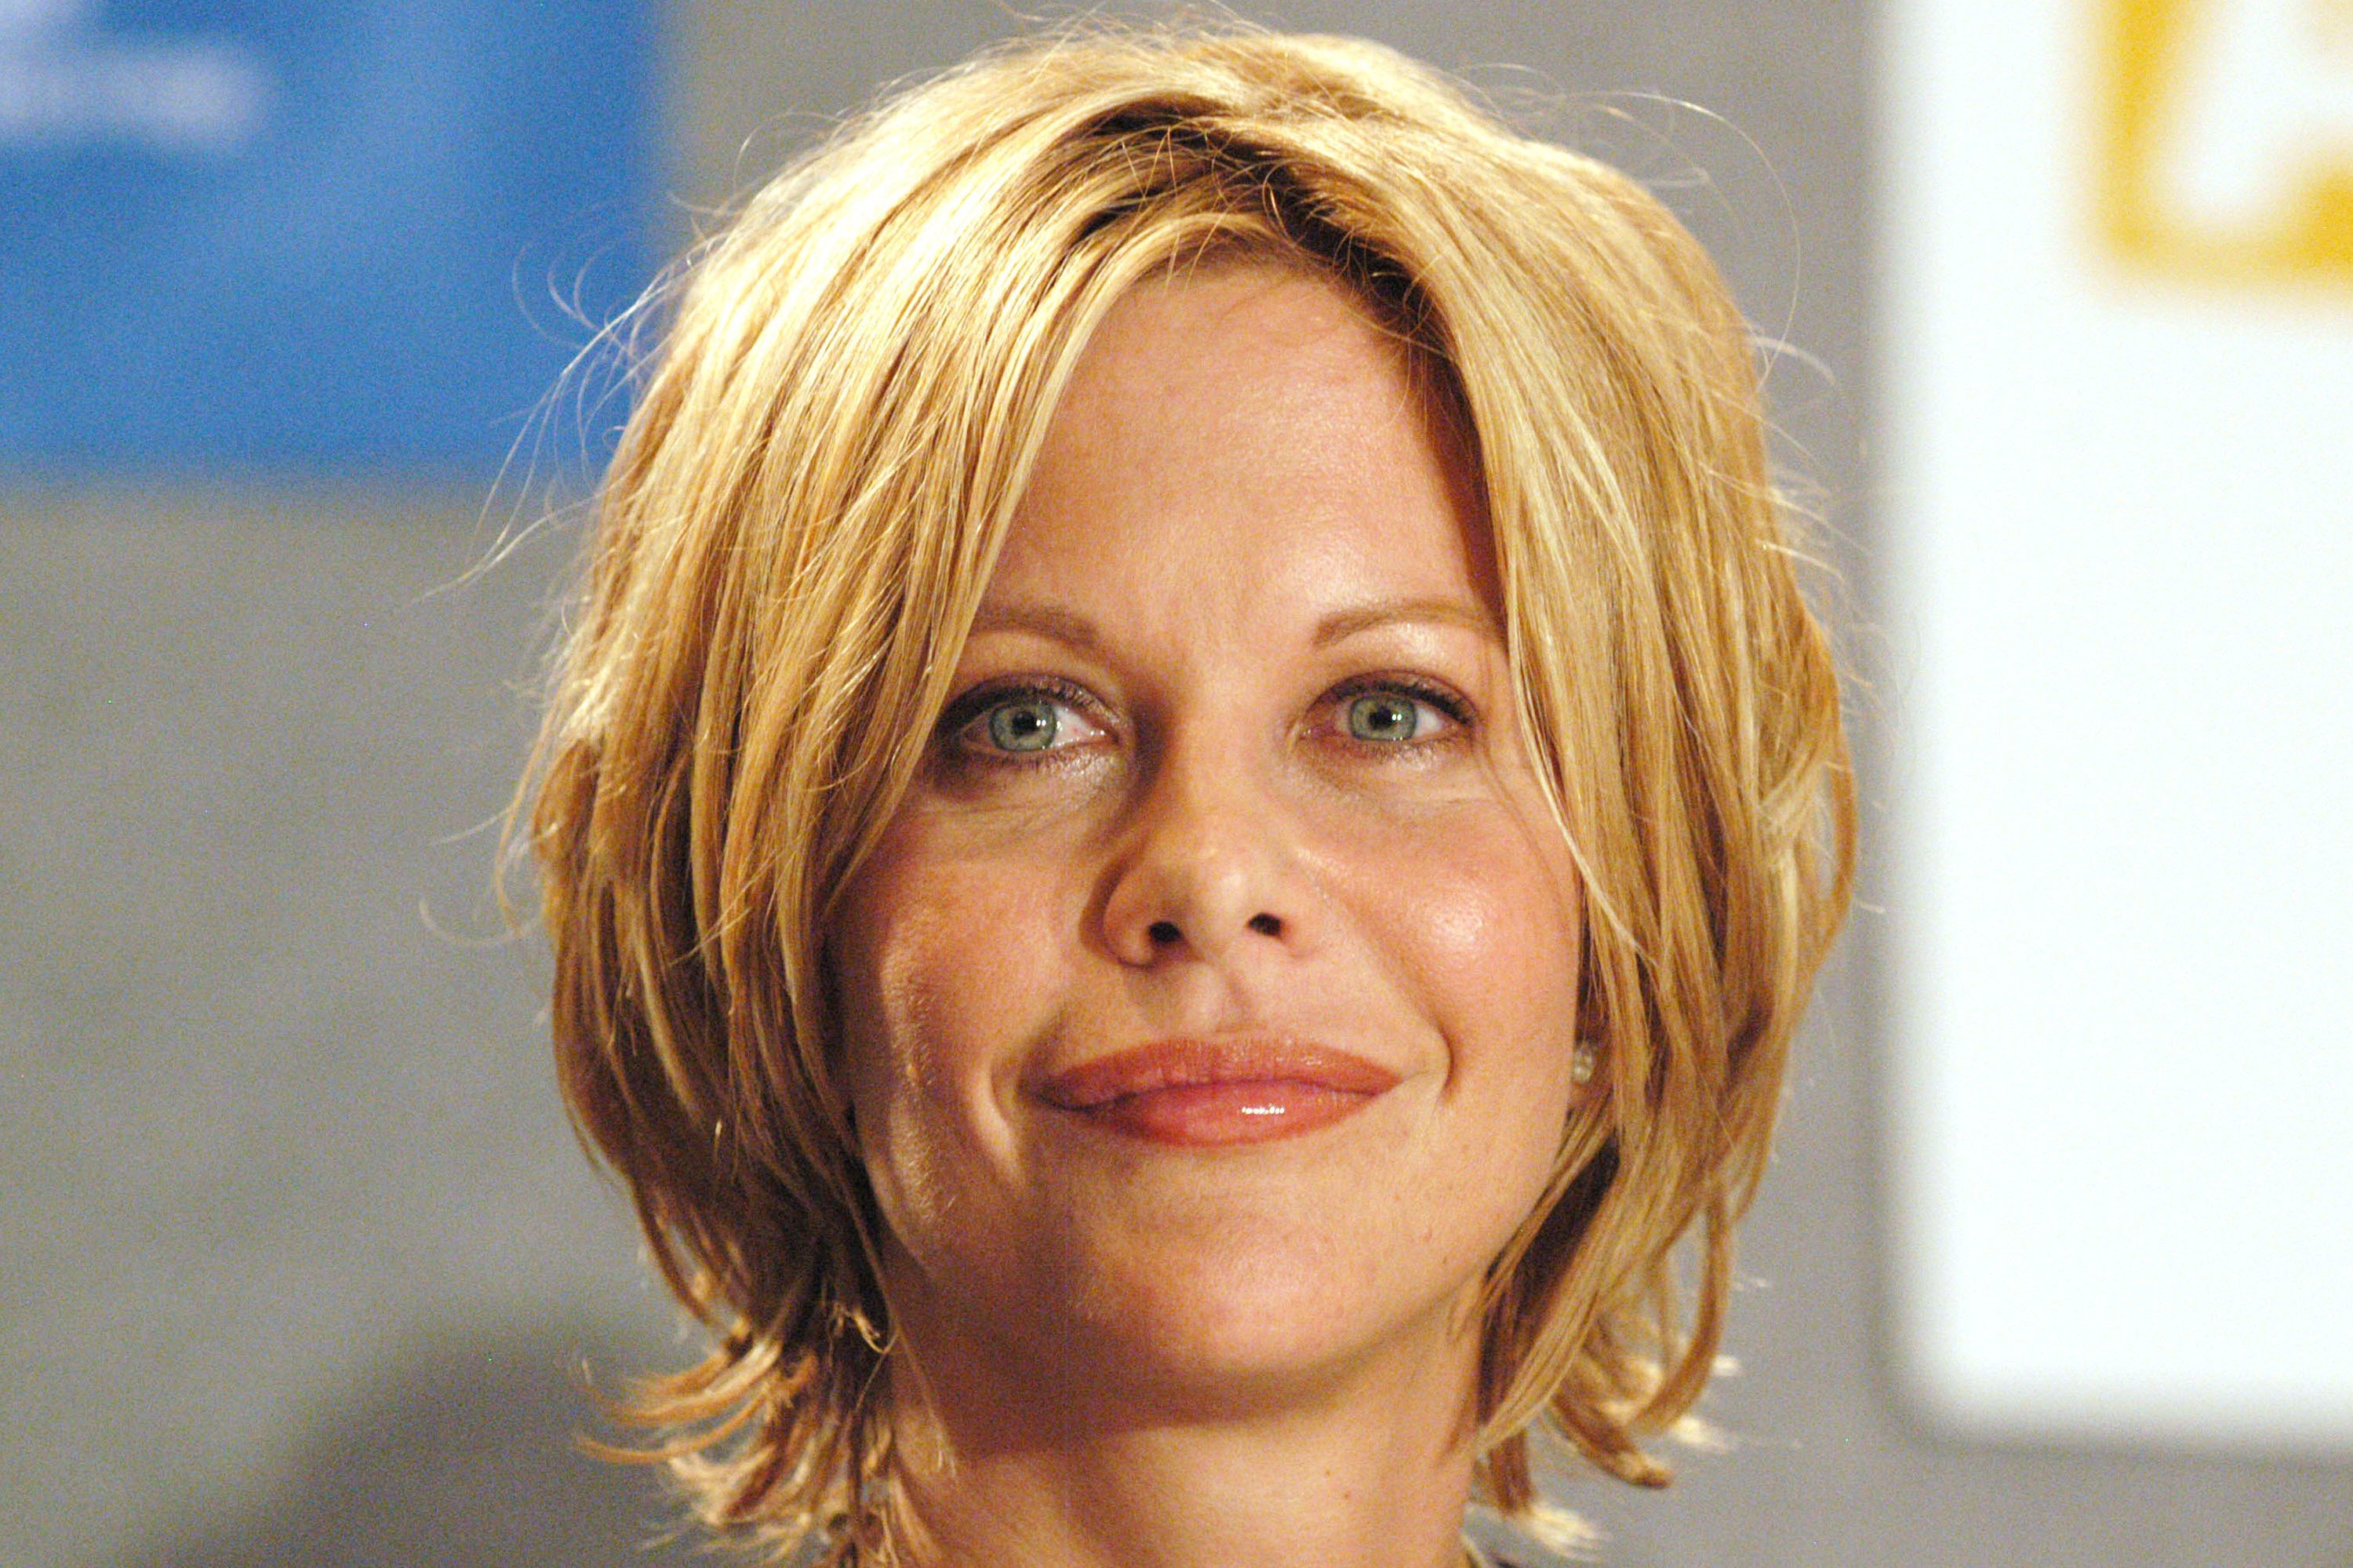 Meg Ryan in short hair at a press conference in 2003.